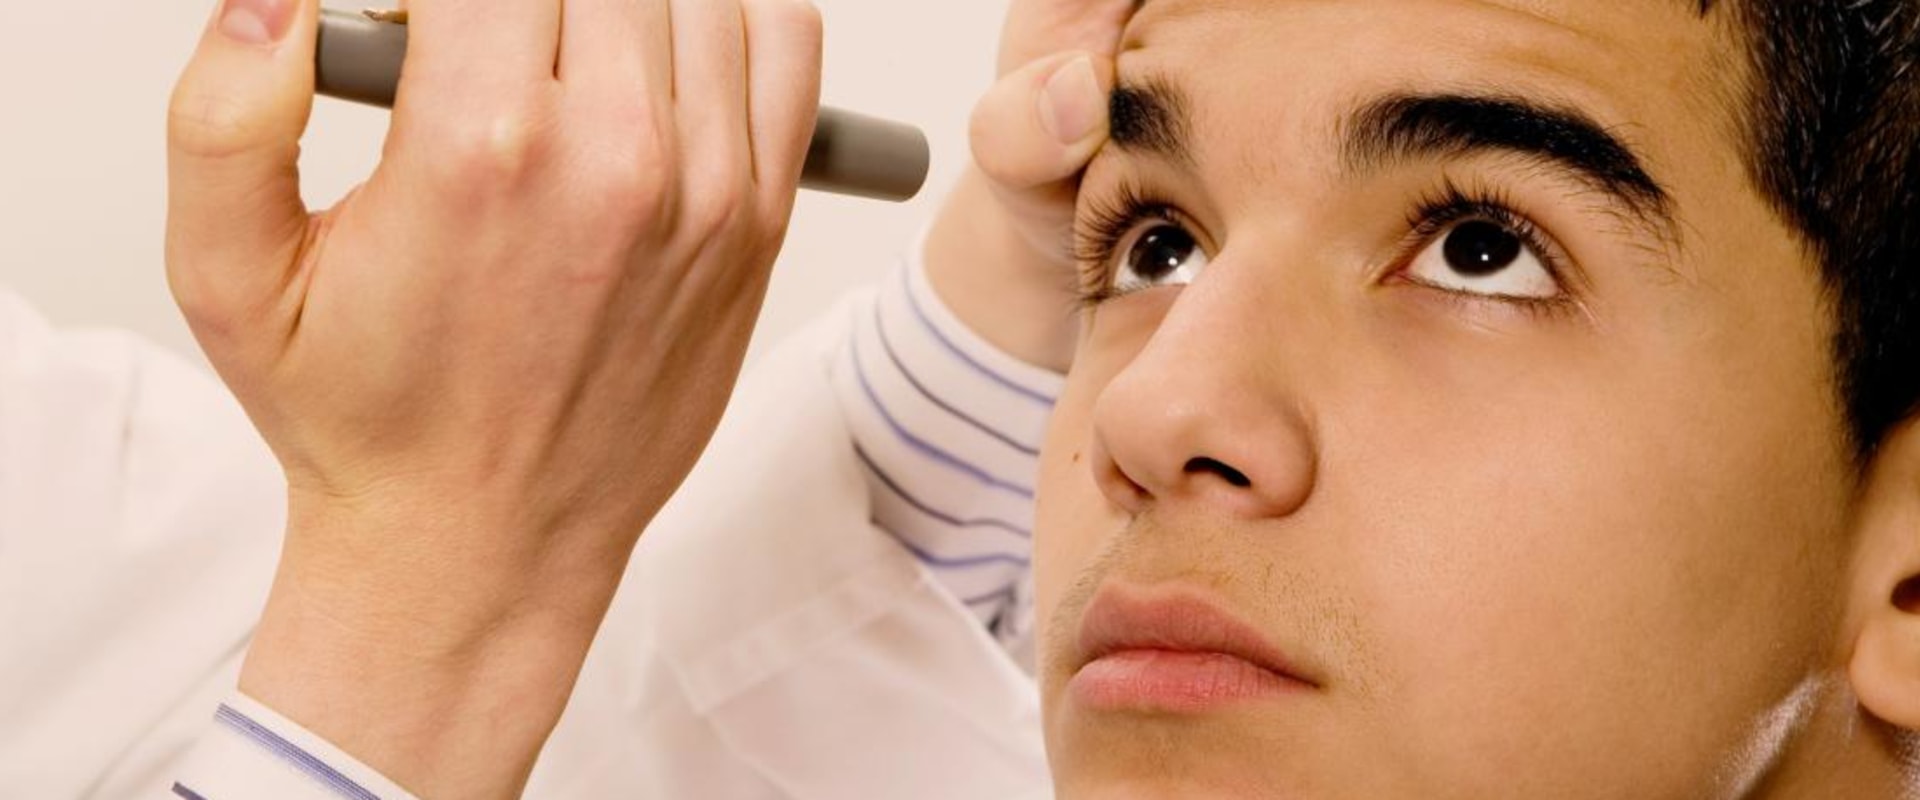 What Should You Avoid Before an Eye Exam?